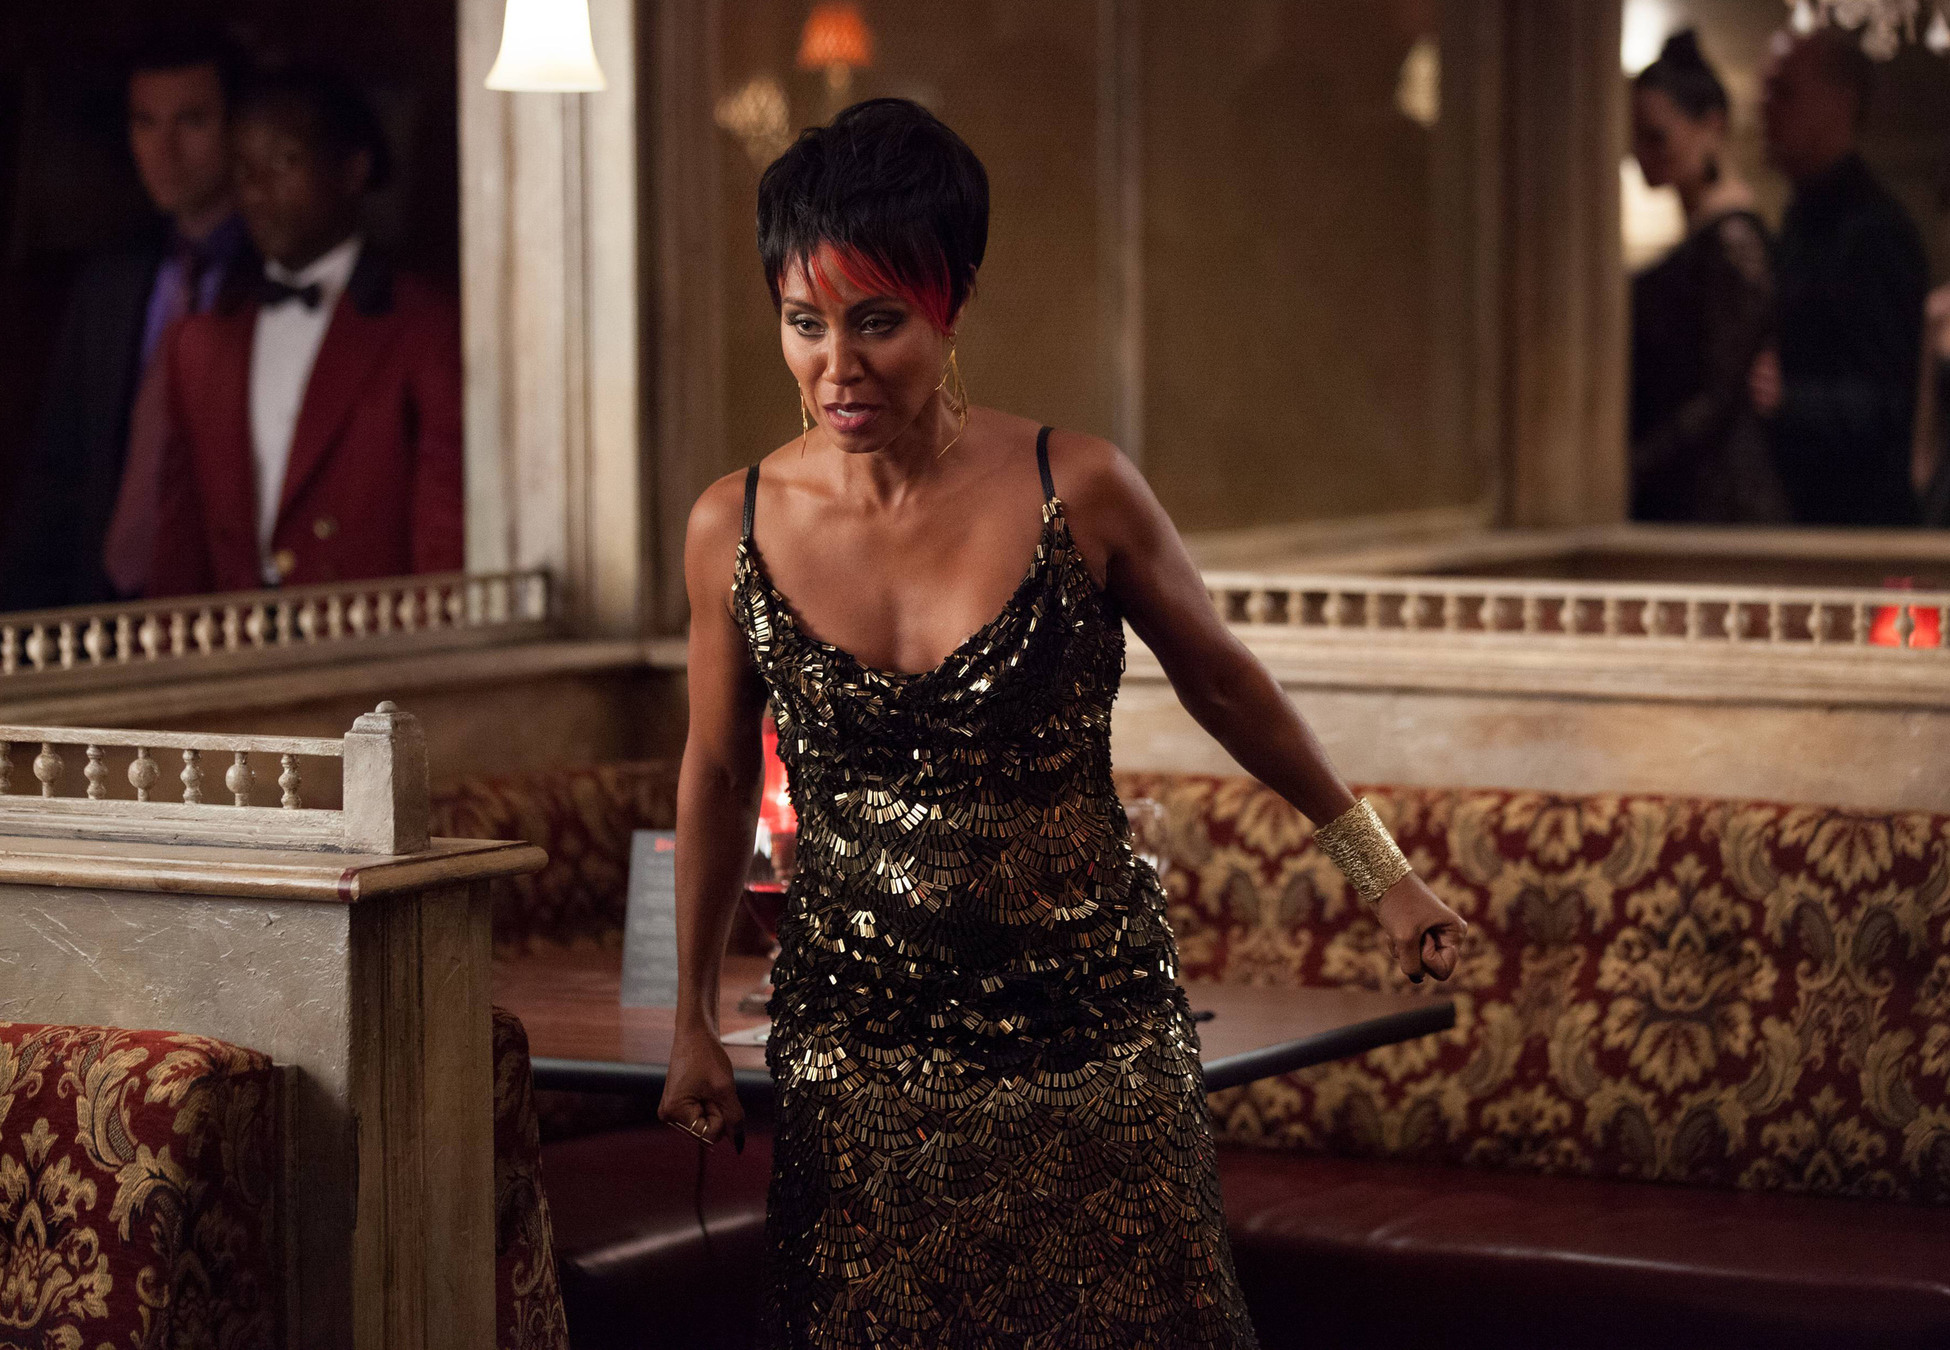 GOTHAM: Fish Mooney (Jada Pinkett Smith) orders everyone to leave her club in the "Selina Kyle" episode of GOTHAM airing Monday, Sept. 29 (8:00-9:00 PM ET/PT) on FOX. Â©2014 Fox Broadcasting Co. Cr: Jessica Miglio/FOX